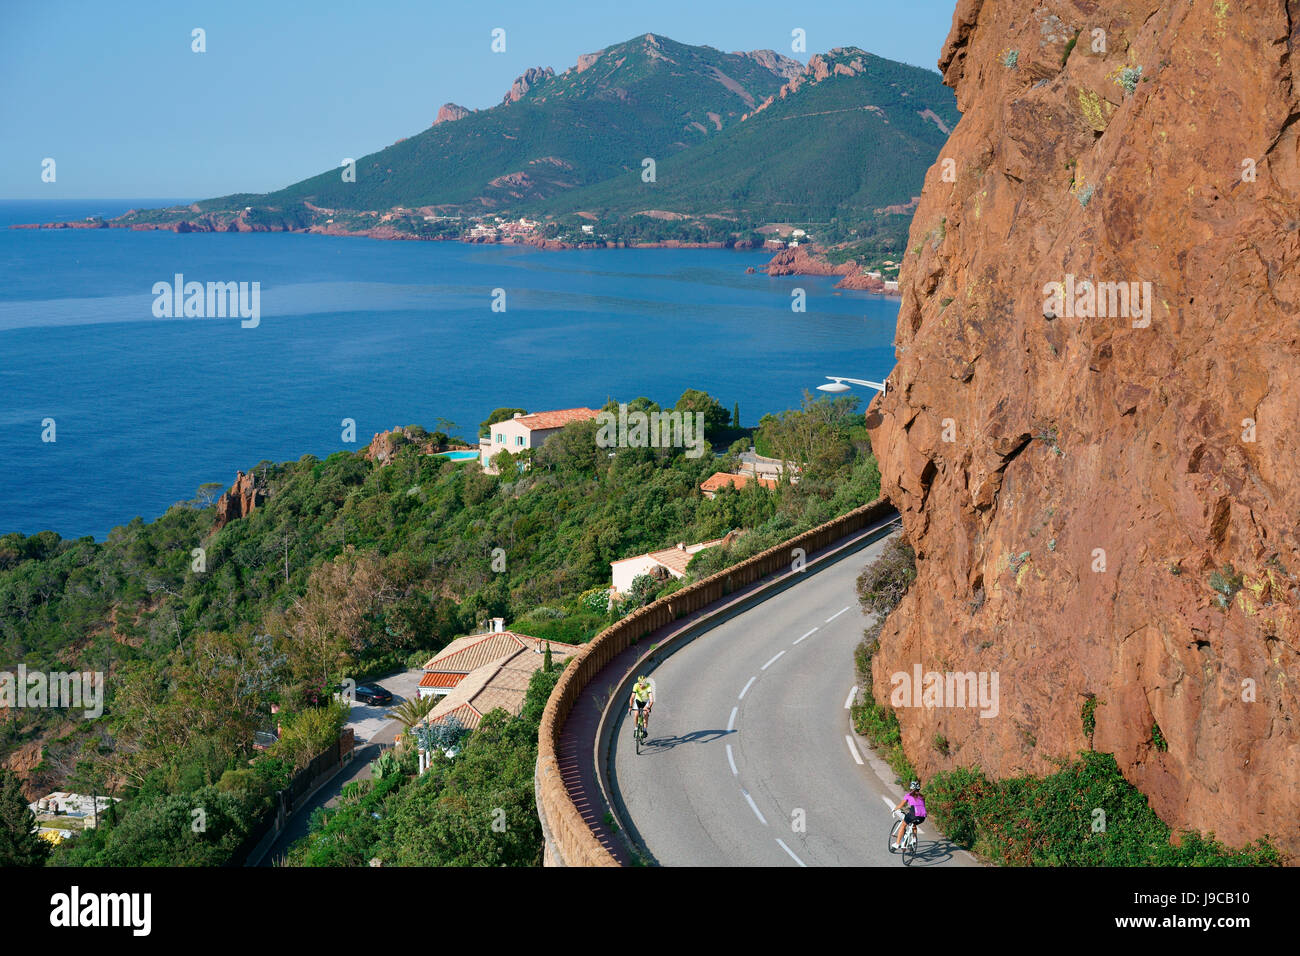 Cyclists on the scenic Corniche d'Or between the red volcanic rock of the Esterel Massif and the azure Mediterranean Sea. French Riviera, France. Stock Photo